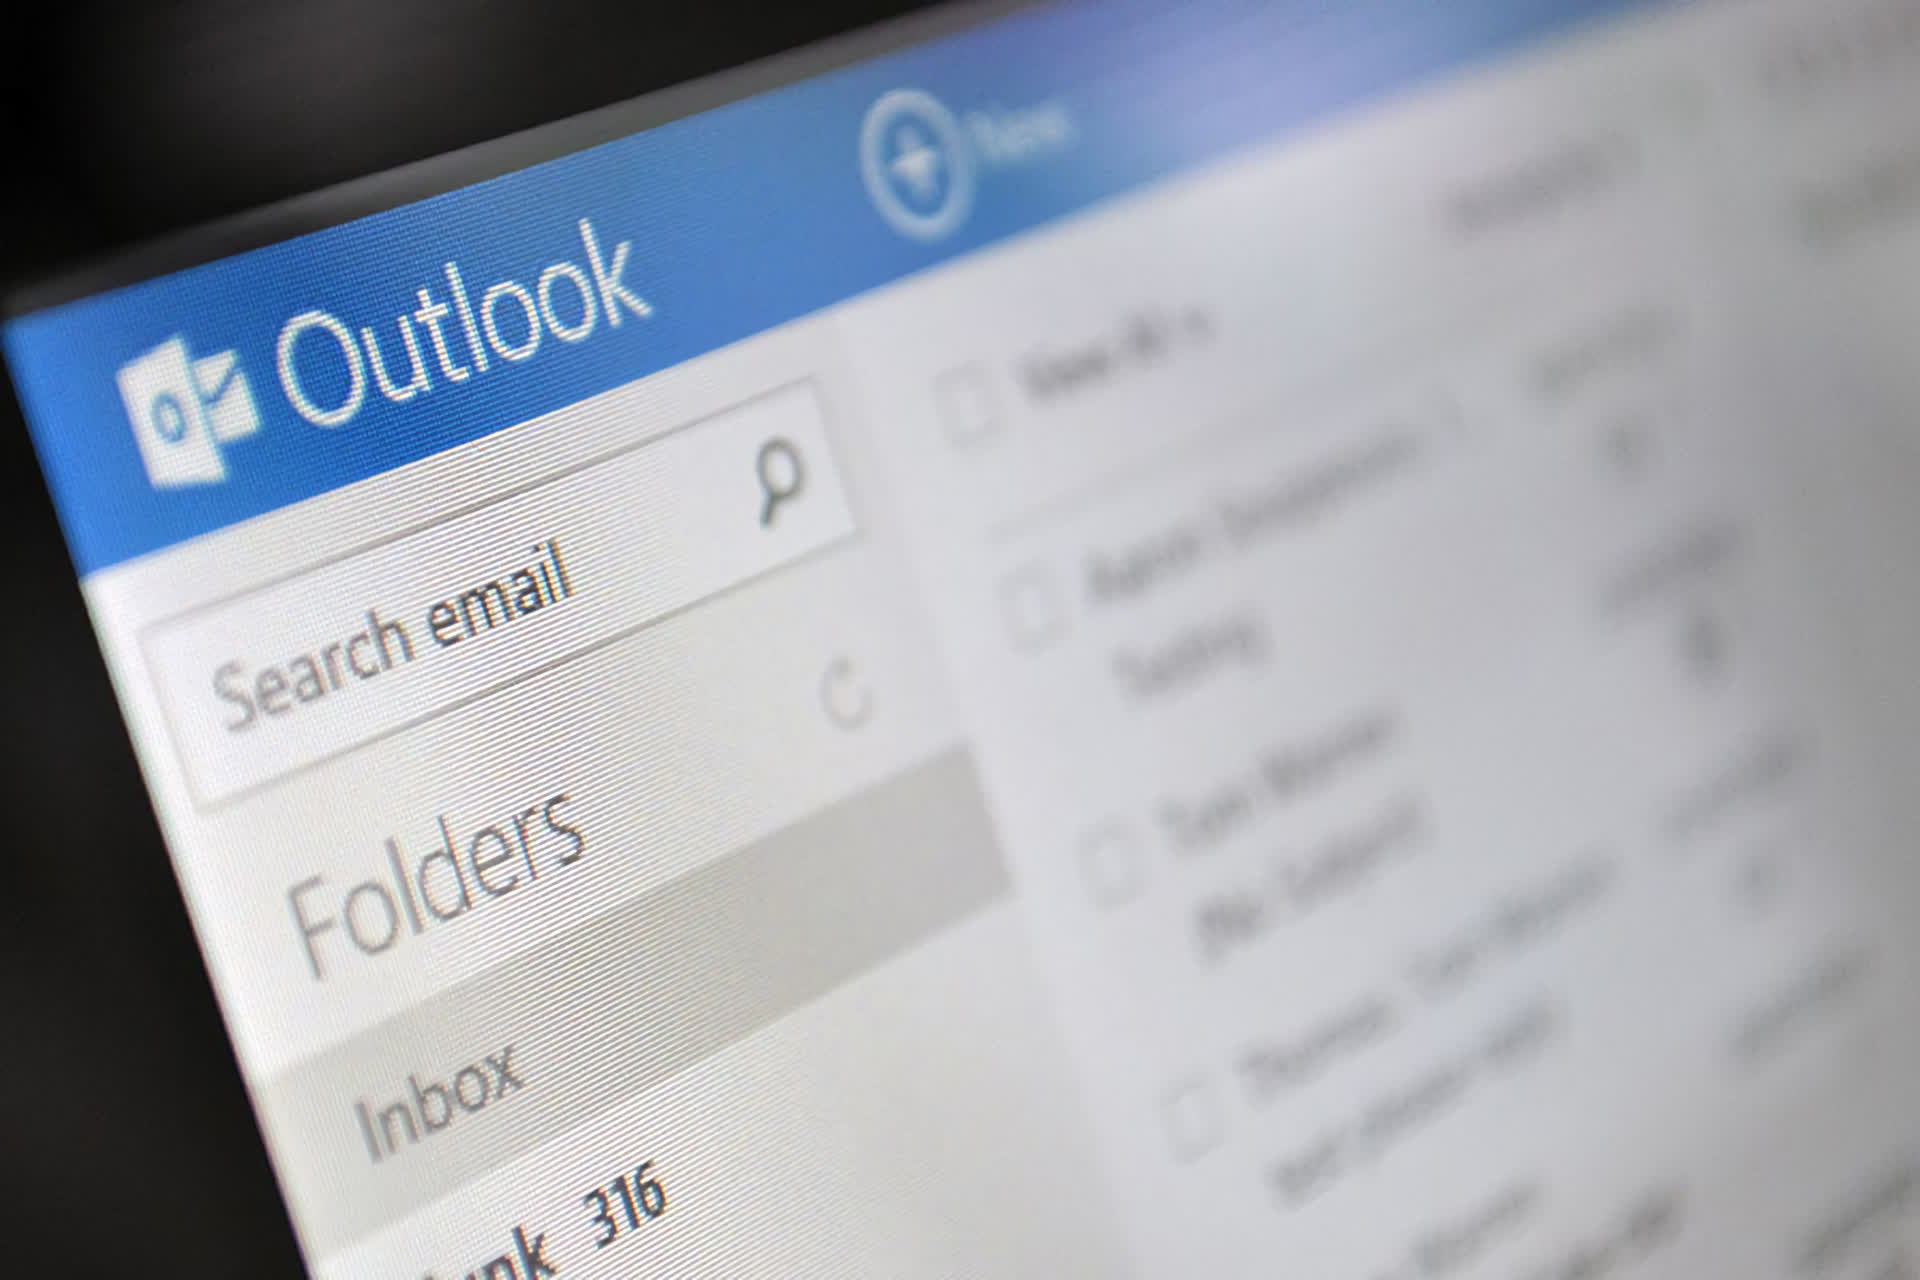 Microsoft plans to get rid of desktop Outlook apps in favor of unified web app